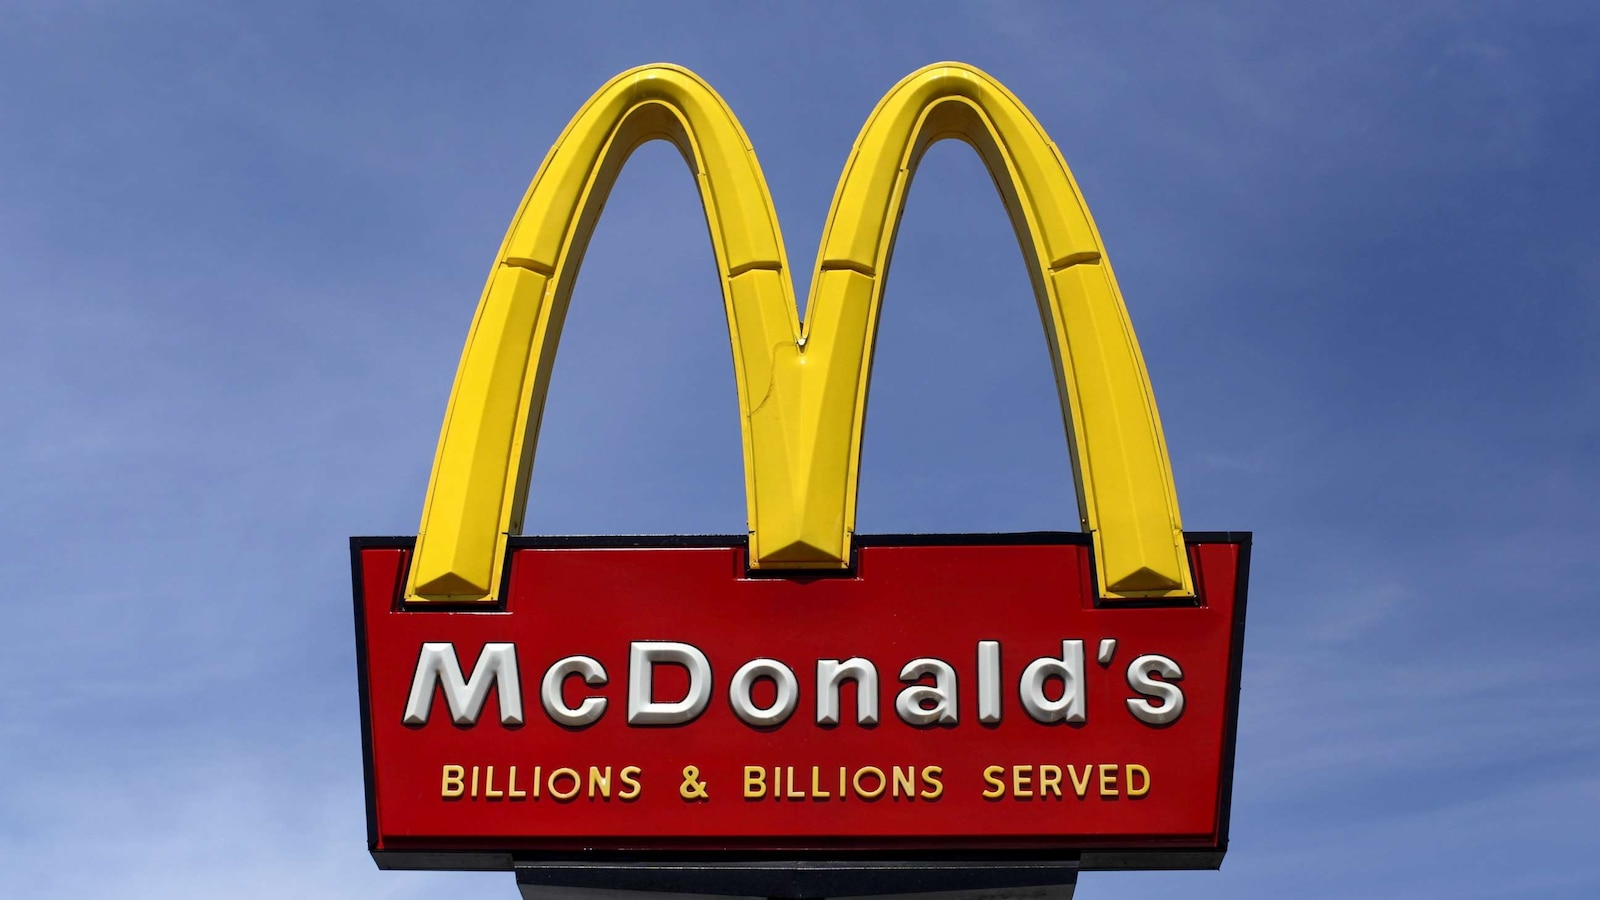 McDonald's stock experiences decline following CEO's commitment to affordability in recent earnings call